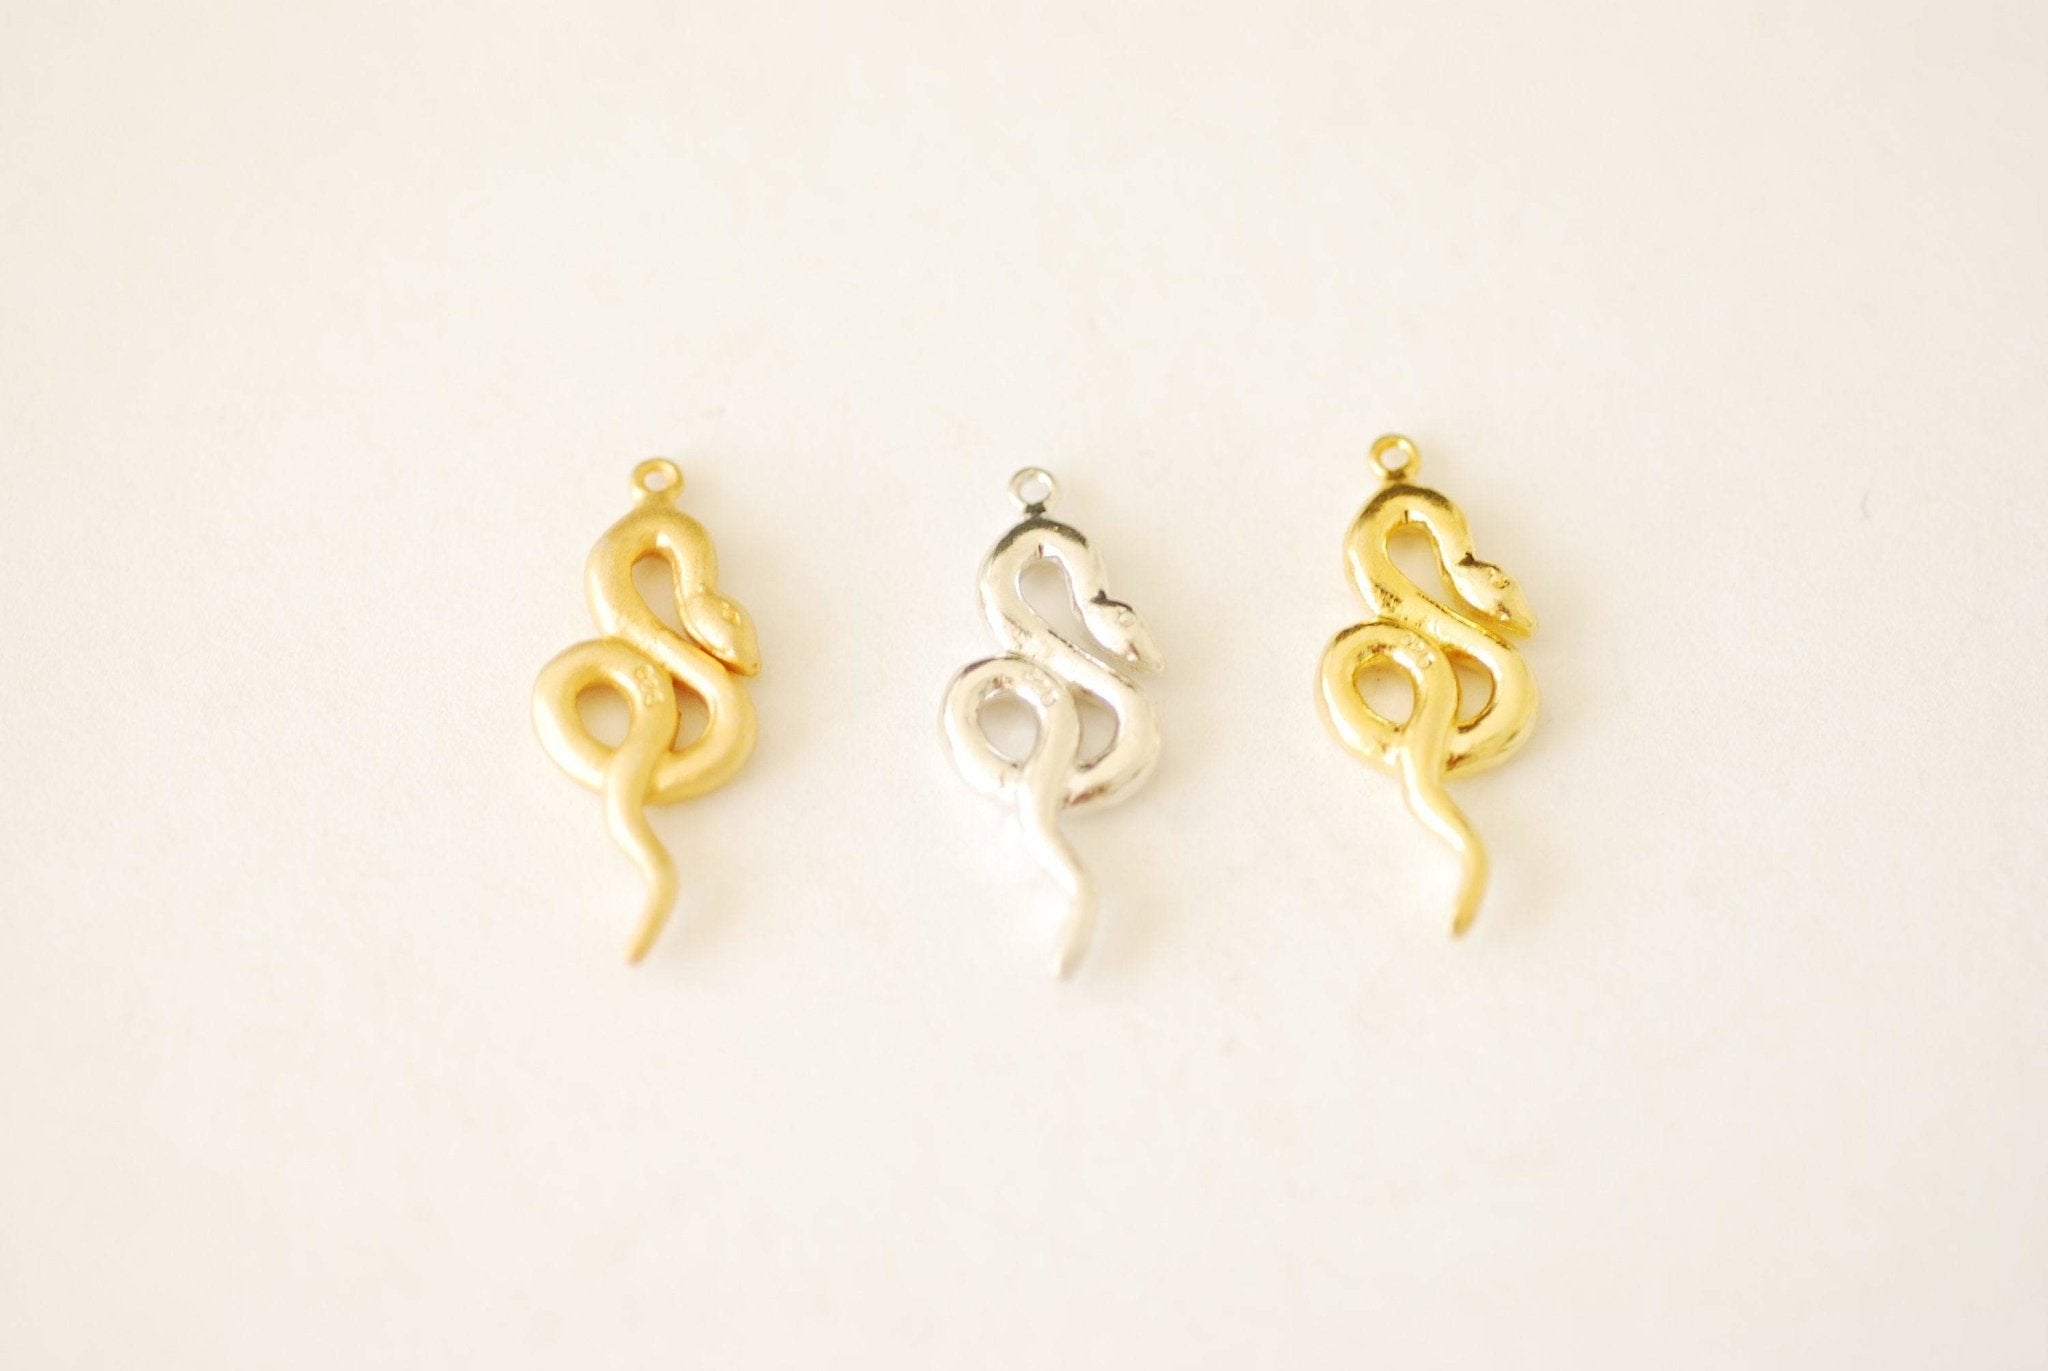 Vermeil Gold or Sterling Silver Snake Charm - Gold Coiled Snake Serpent Reptile Snake Jewelry Animal Charms DIY Jewelry Zodiac [A101] - HarperCrown